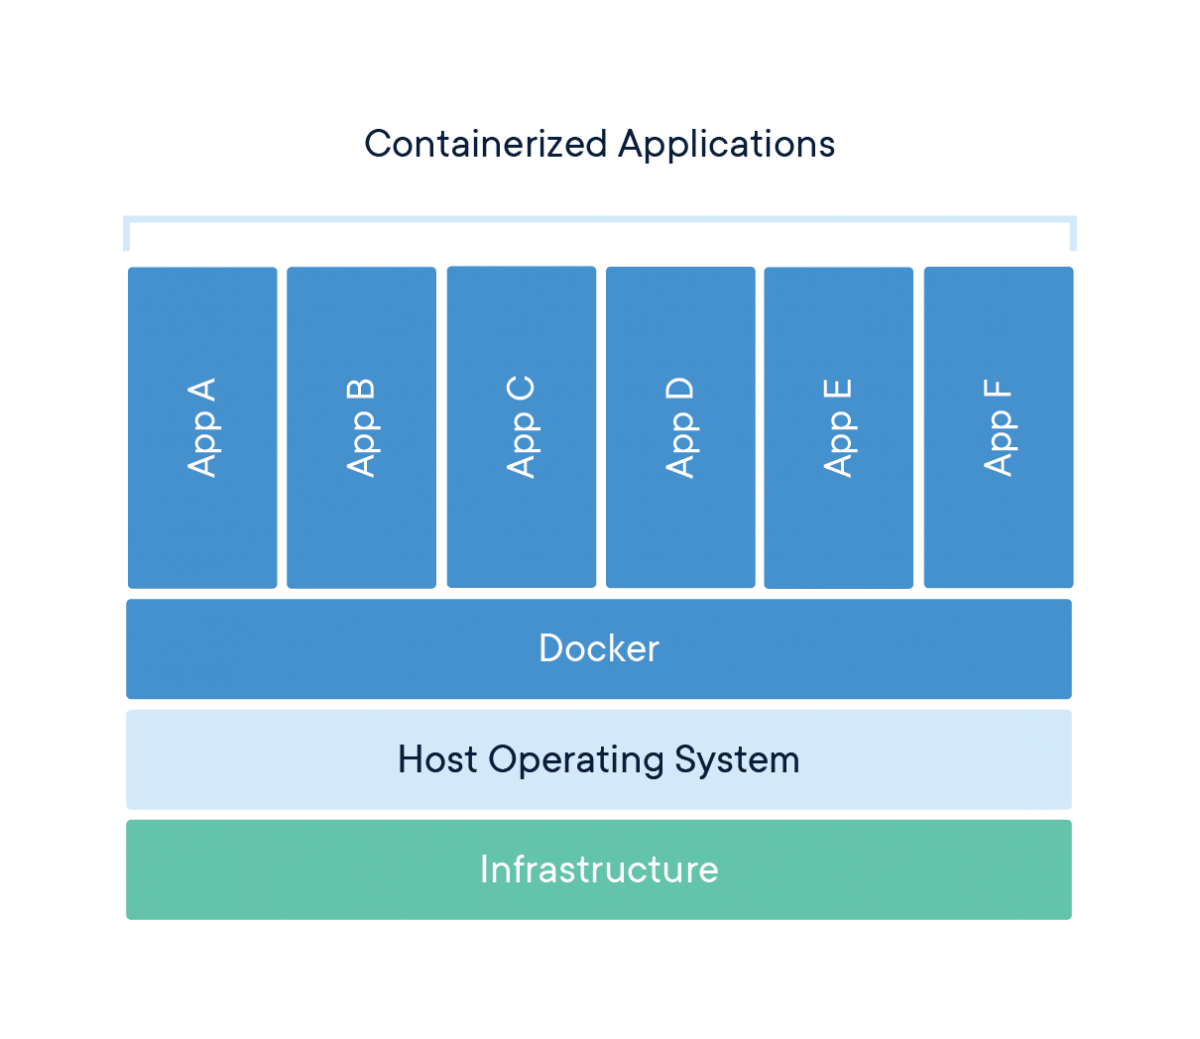 https://www.docker.com/resources/what-container